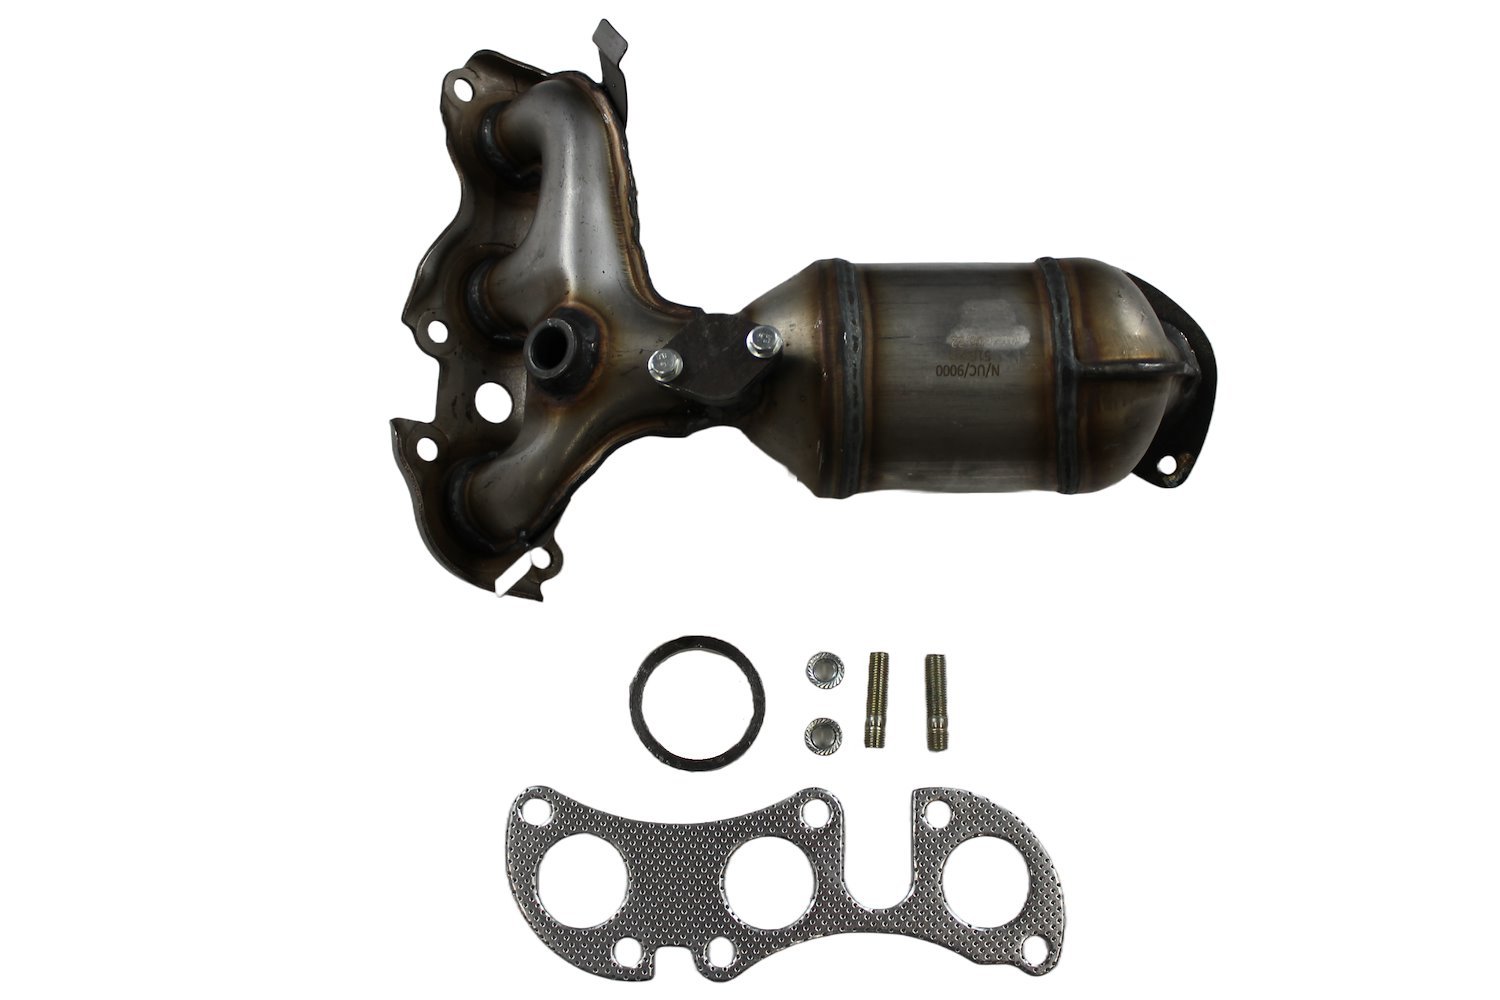 Catalytic Converter Fits 2002-2003 Lexus ES300, 2002-2006 Toyota Camry w/3.0L V6 Eng. [Firewall Side]